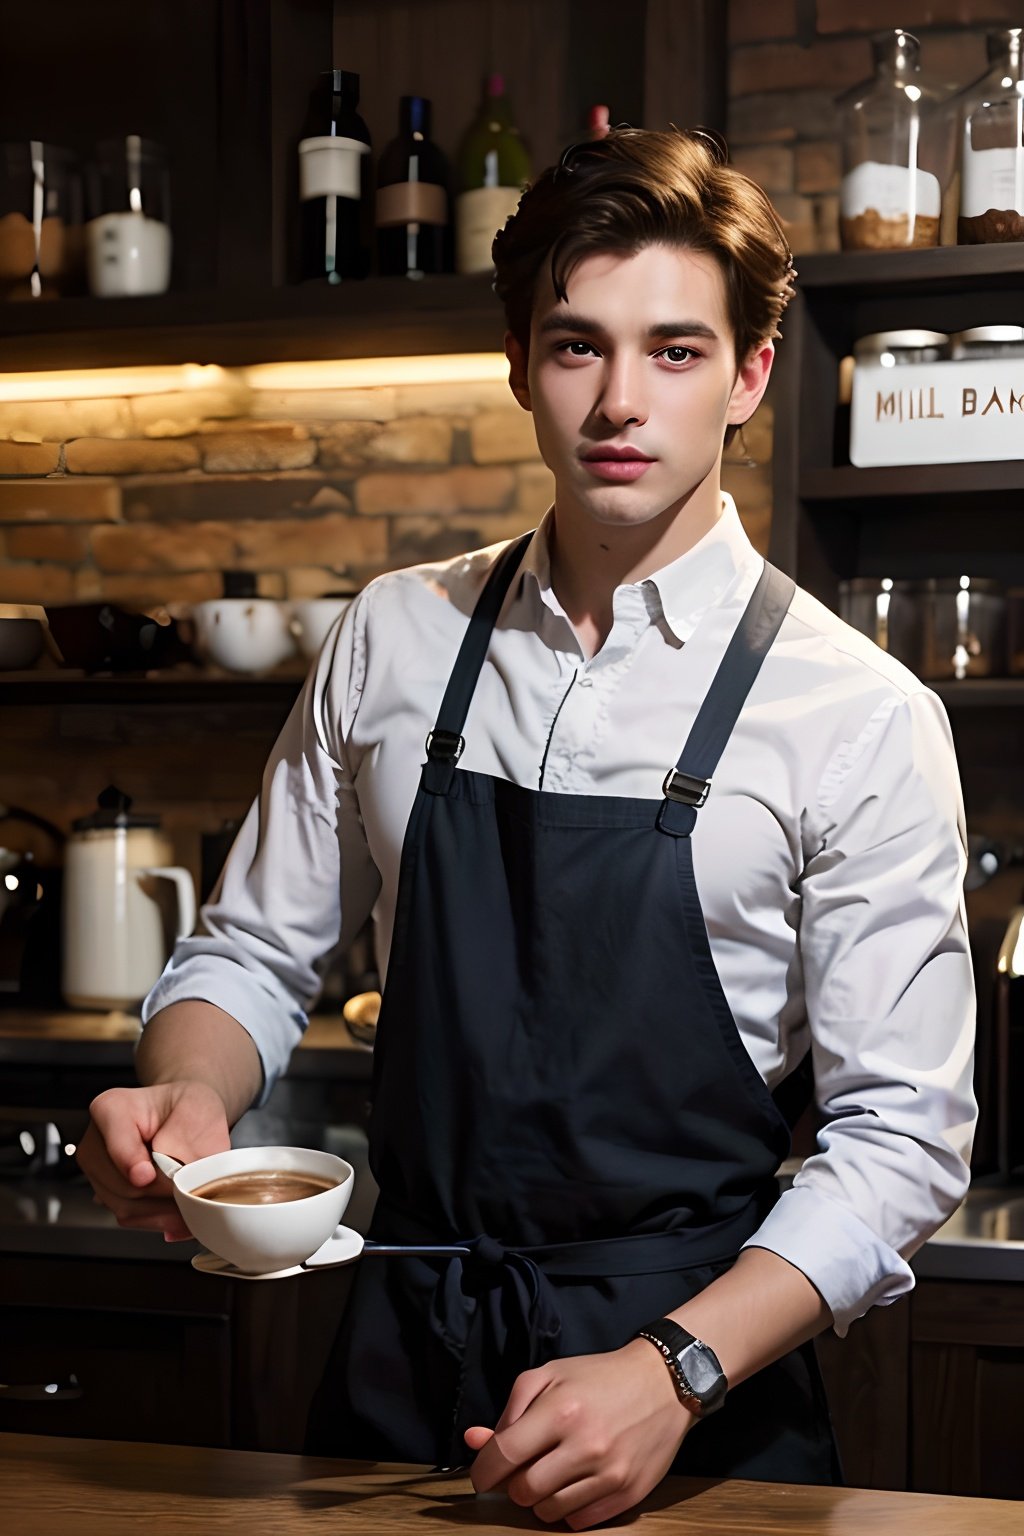 In the realm of enchanting coffee craftsmanship graced by the presence of a dashing figure hailing from the extraordinary lands of Britain emerges an exquisite and alluring barista whose youth enhances his remarkable handsomeness